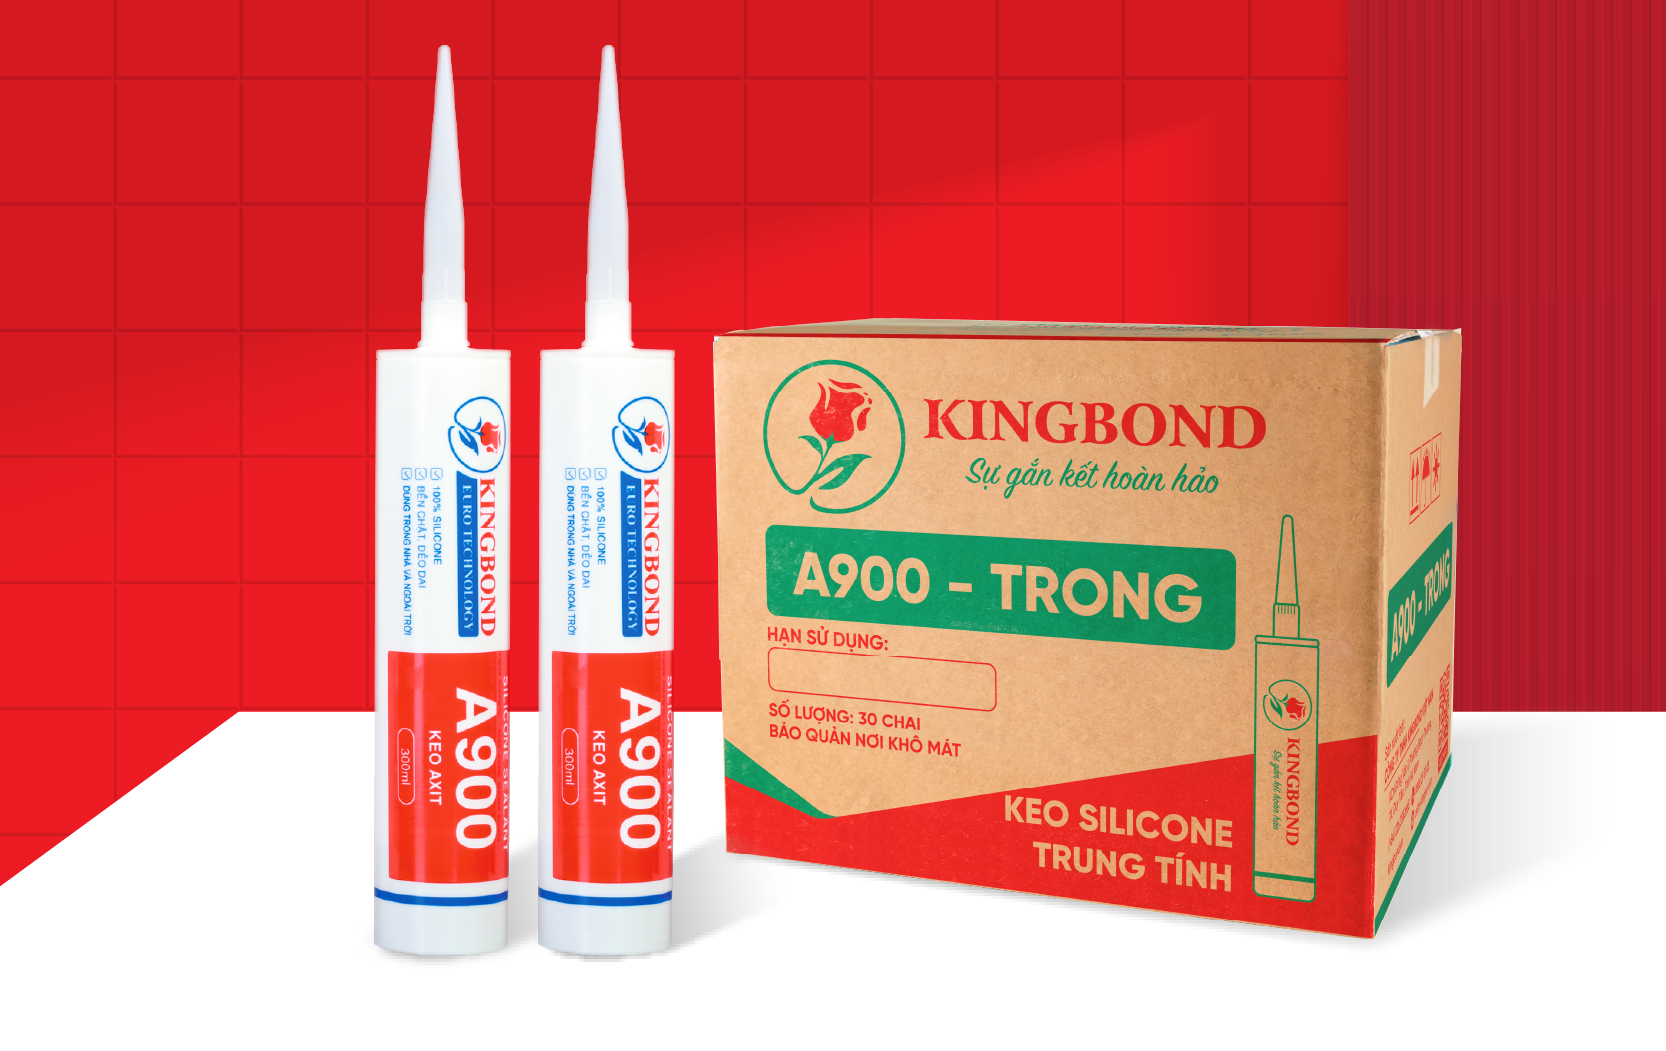 Keo silicone axit A900 trong - Công Ty TNHH Kingbond Việt Nam